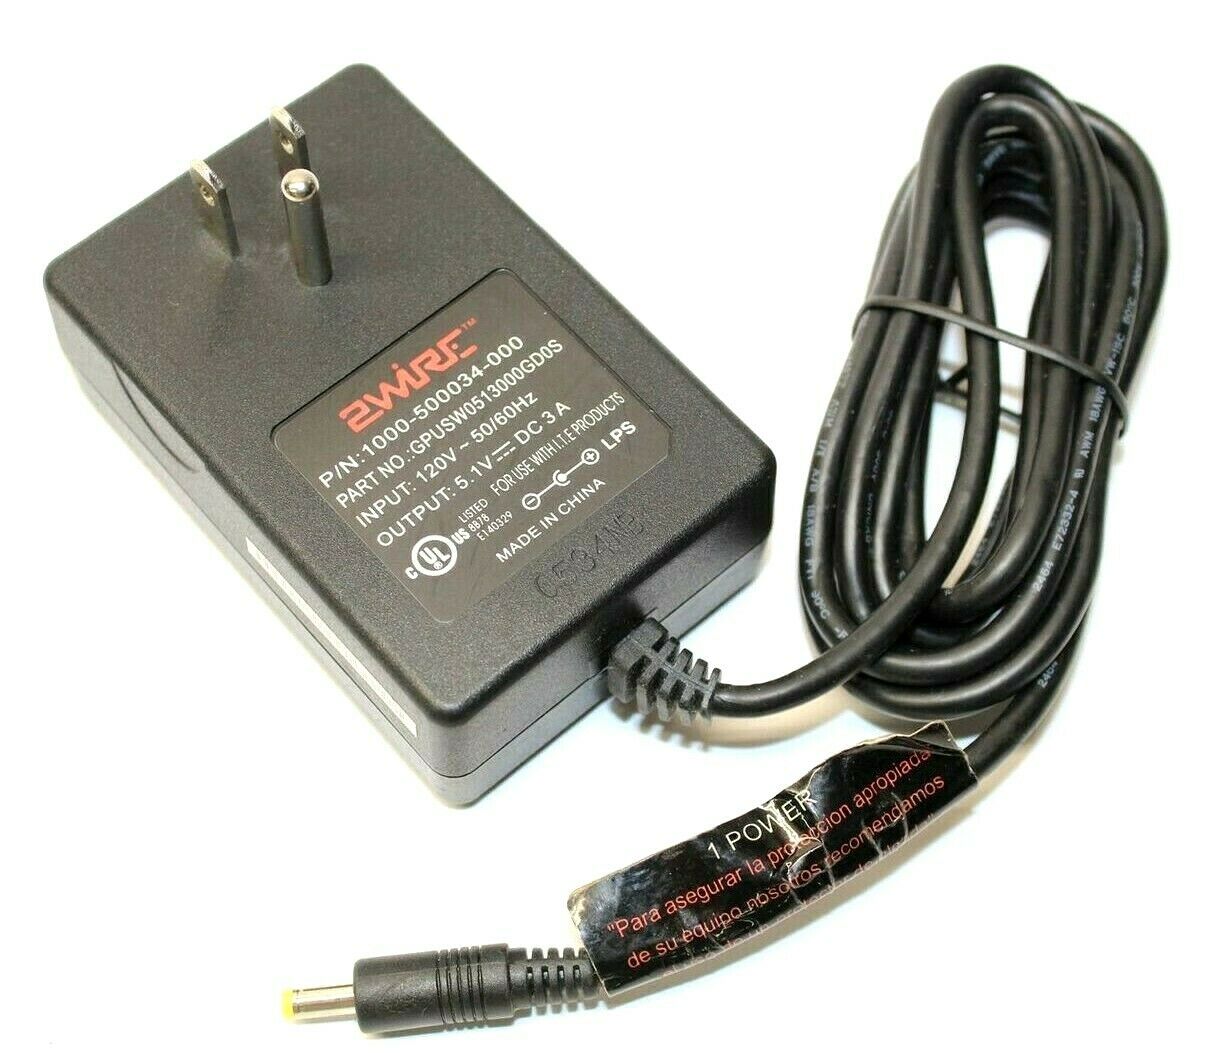 New 5.1V 3A 2Wire GPUSW0513000GD0S 1000-500034-000 Power Supply Ac Adapter